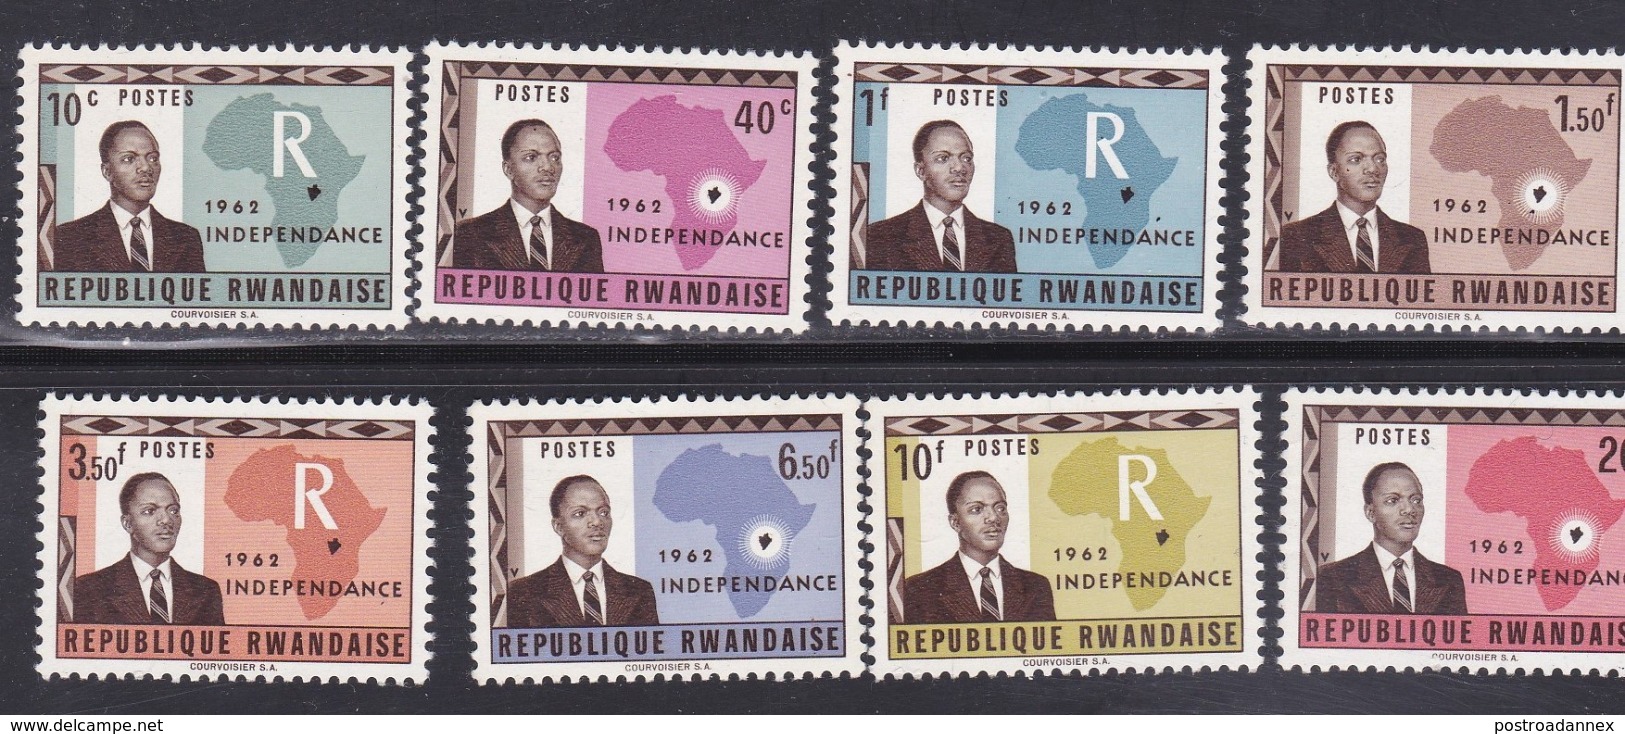 Rwanda, Scott #1-8, Mint Never Hinged, Gregoire Kayibanda And Map Of Africa, Issued 1962 - Unused Stamps